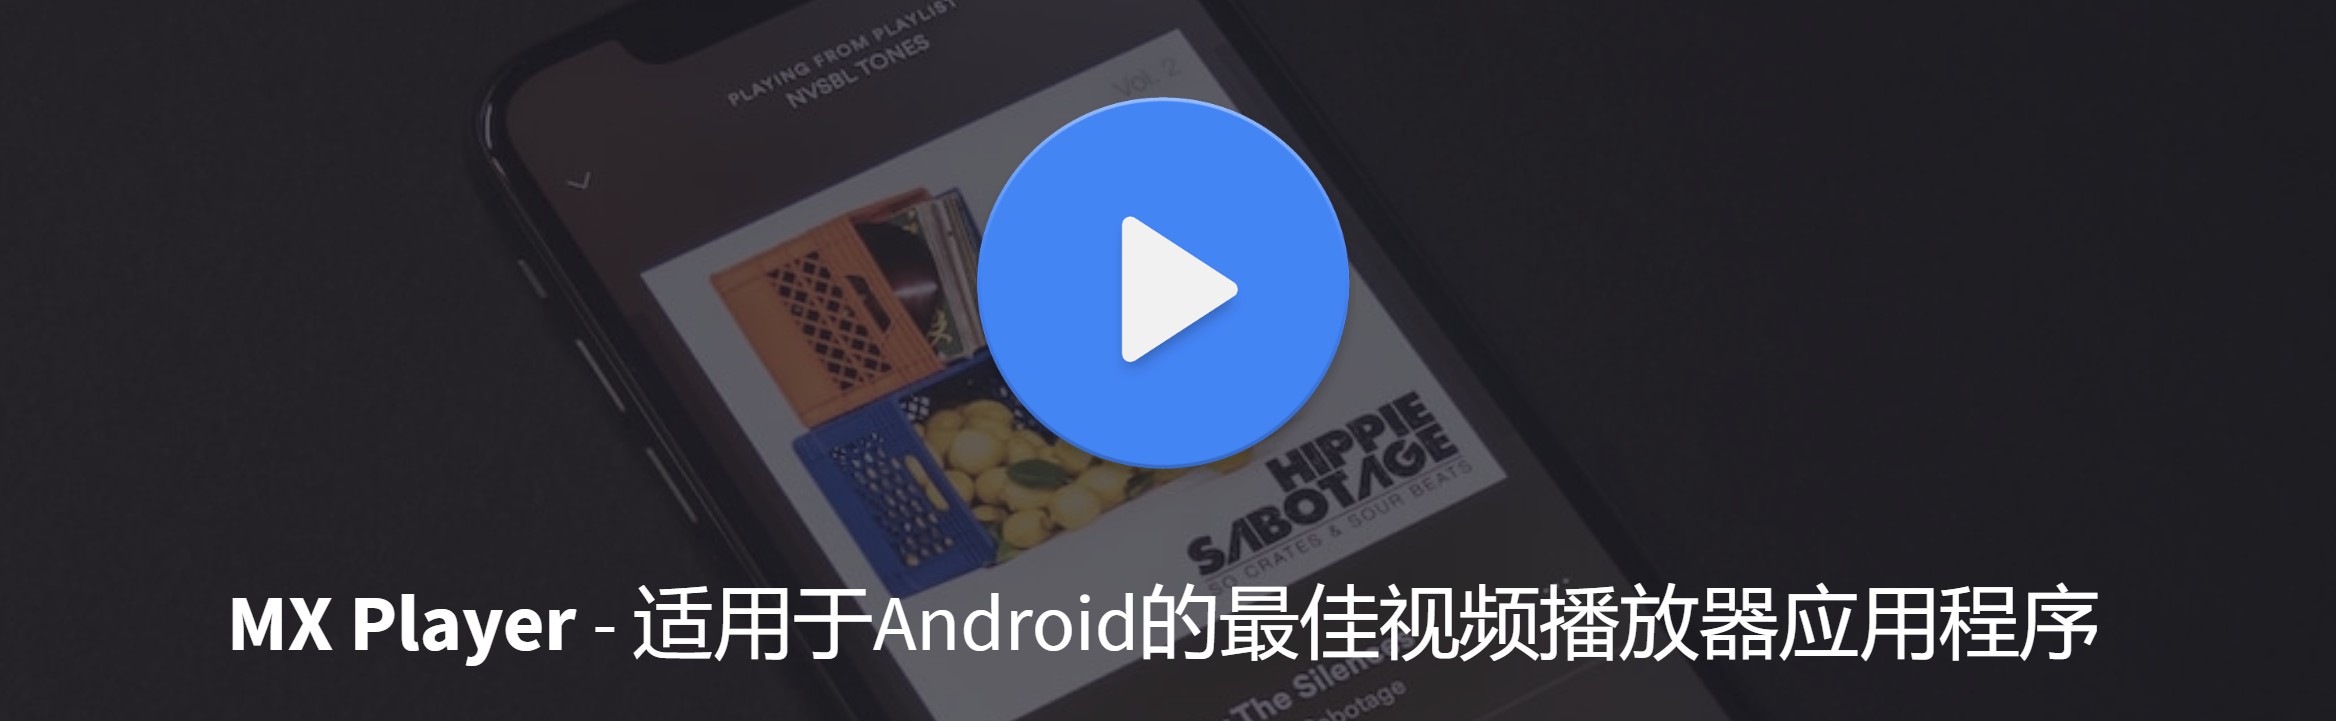 Android MX Player Pro [Final] [Patched] [AC3/DTS] [Mod]-度崩网-几度崩溃